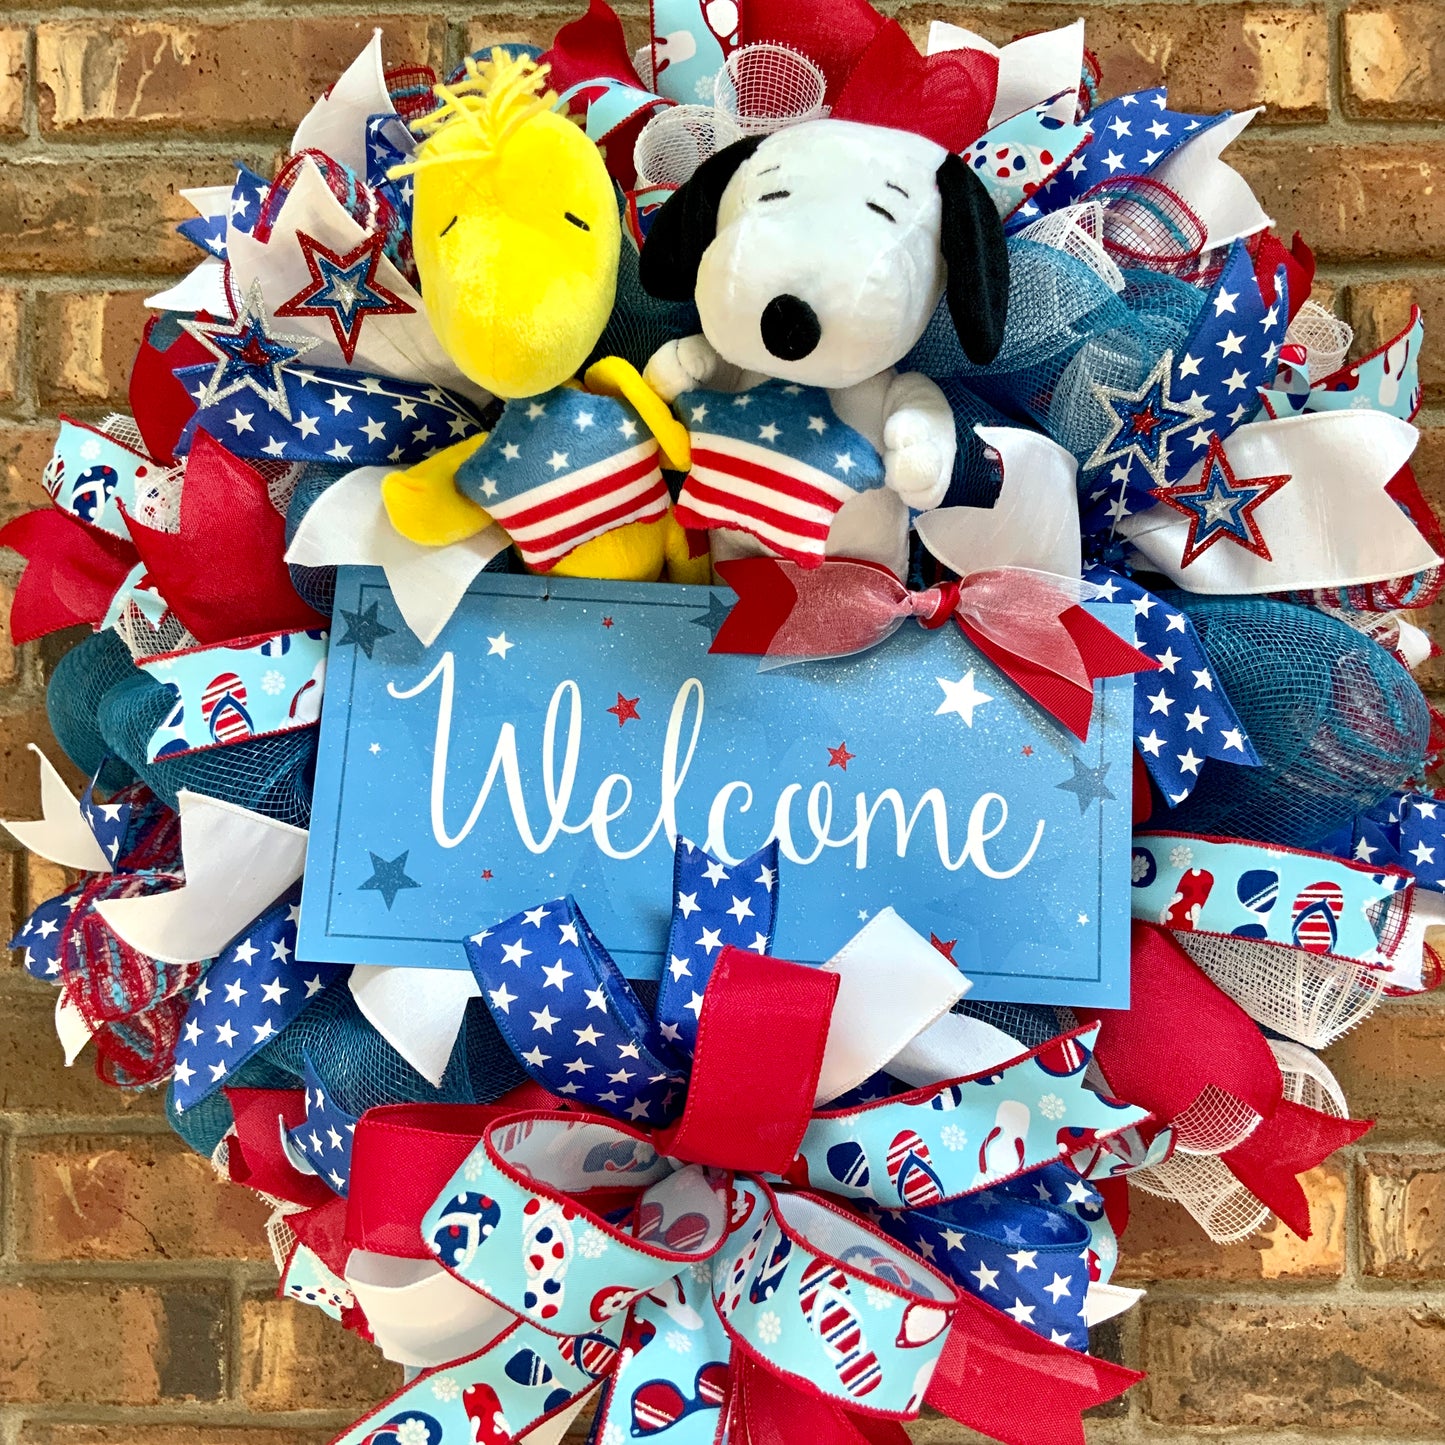 Snoopy Patriotic Wreath, Snoopy Door Hanger, Snoopy and Woodstock Decor, Snoopy Wreath For Front Door, Fourth of July Wreath, Memorial Day Wreath